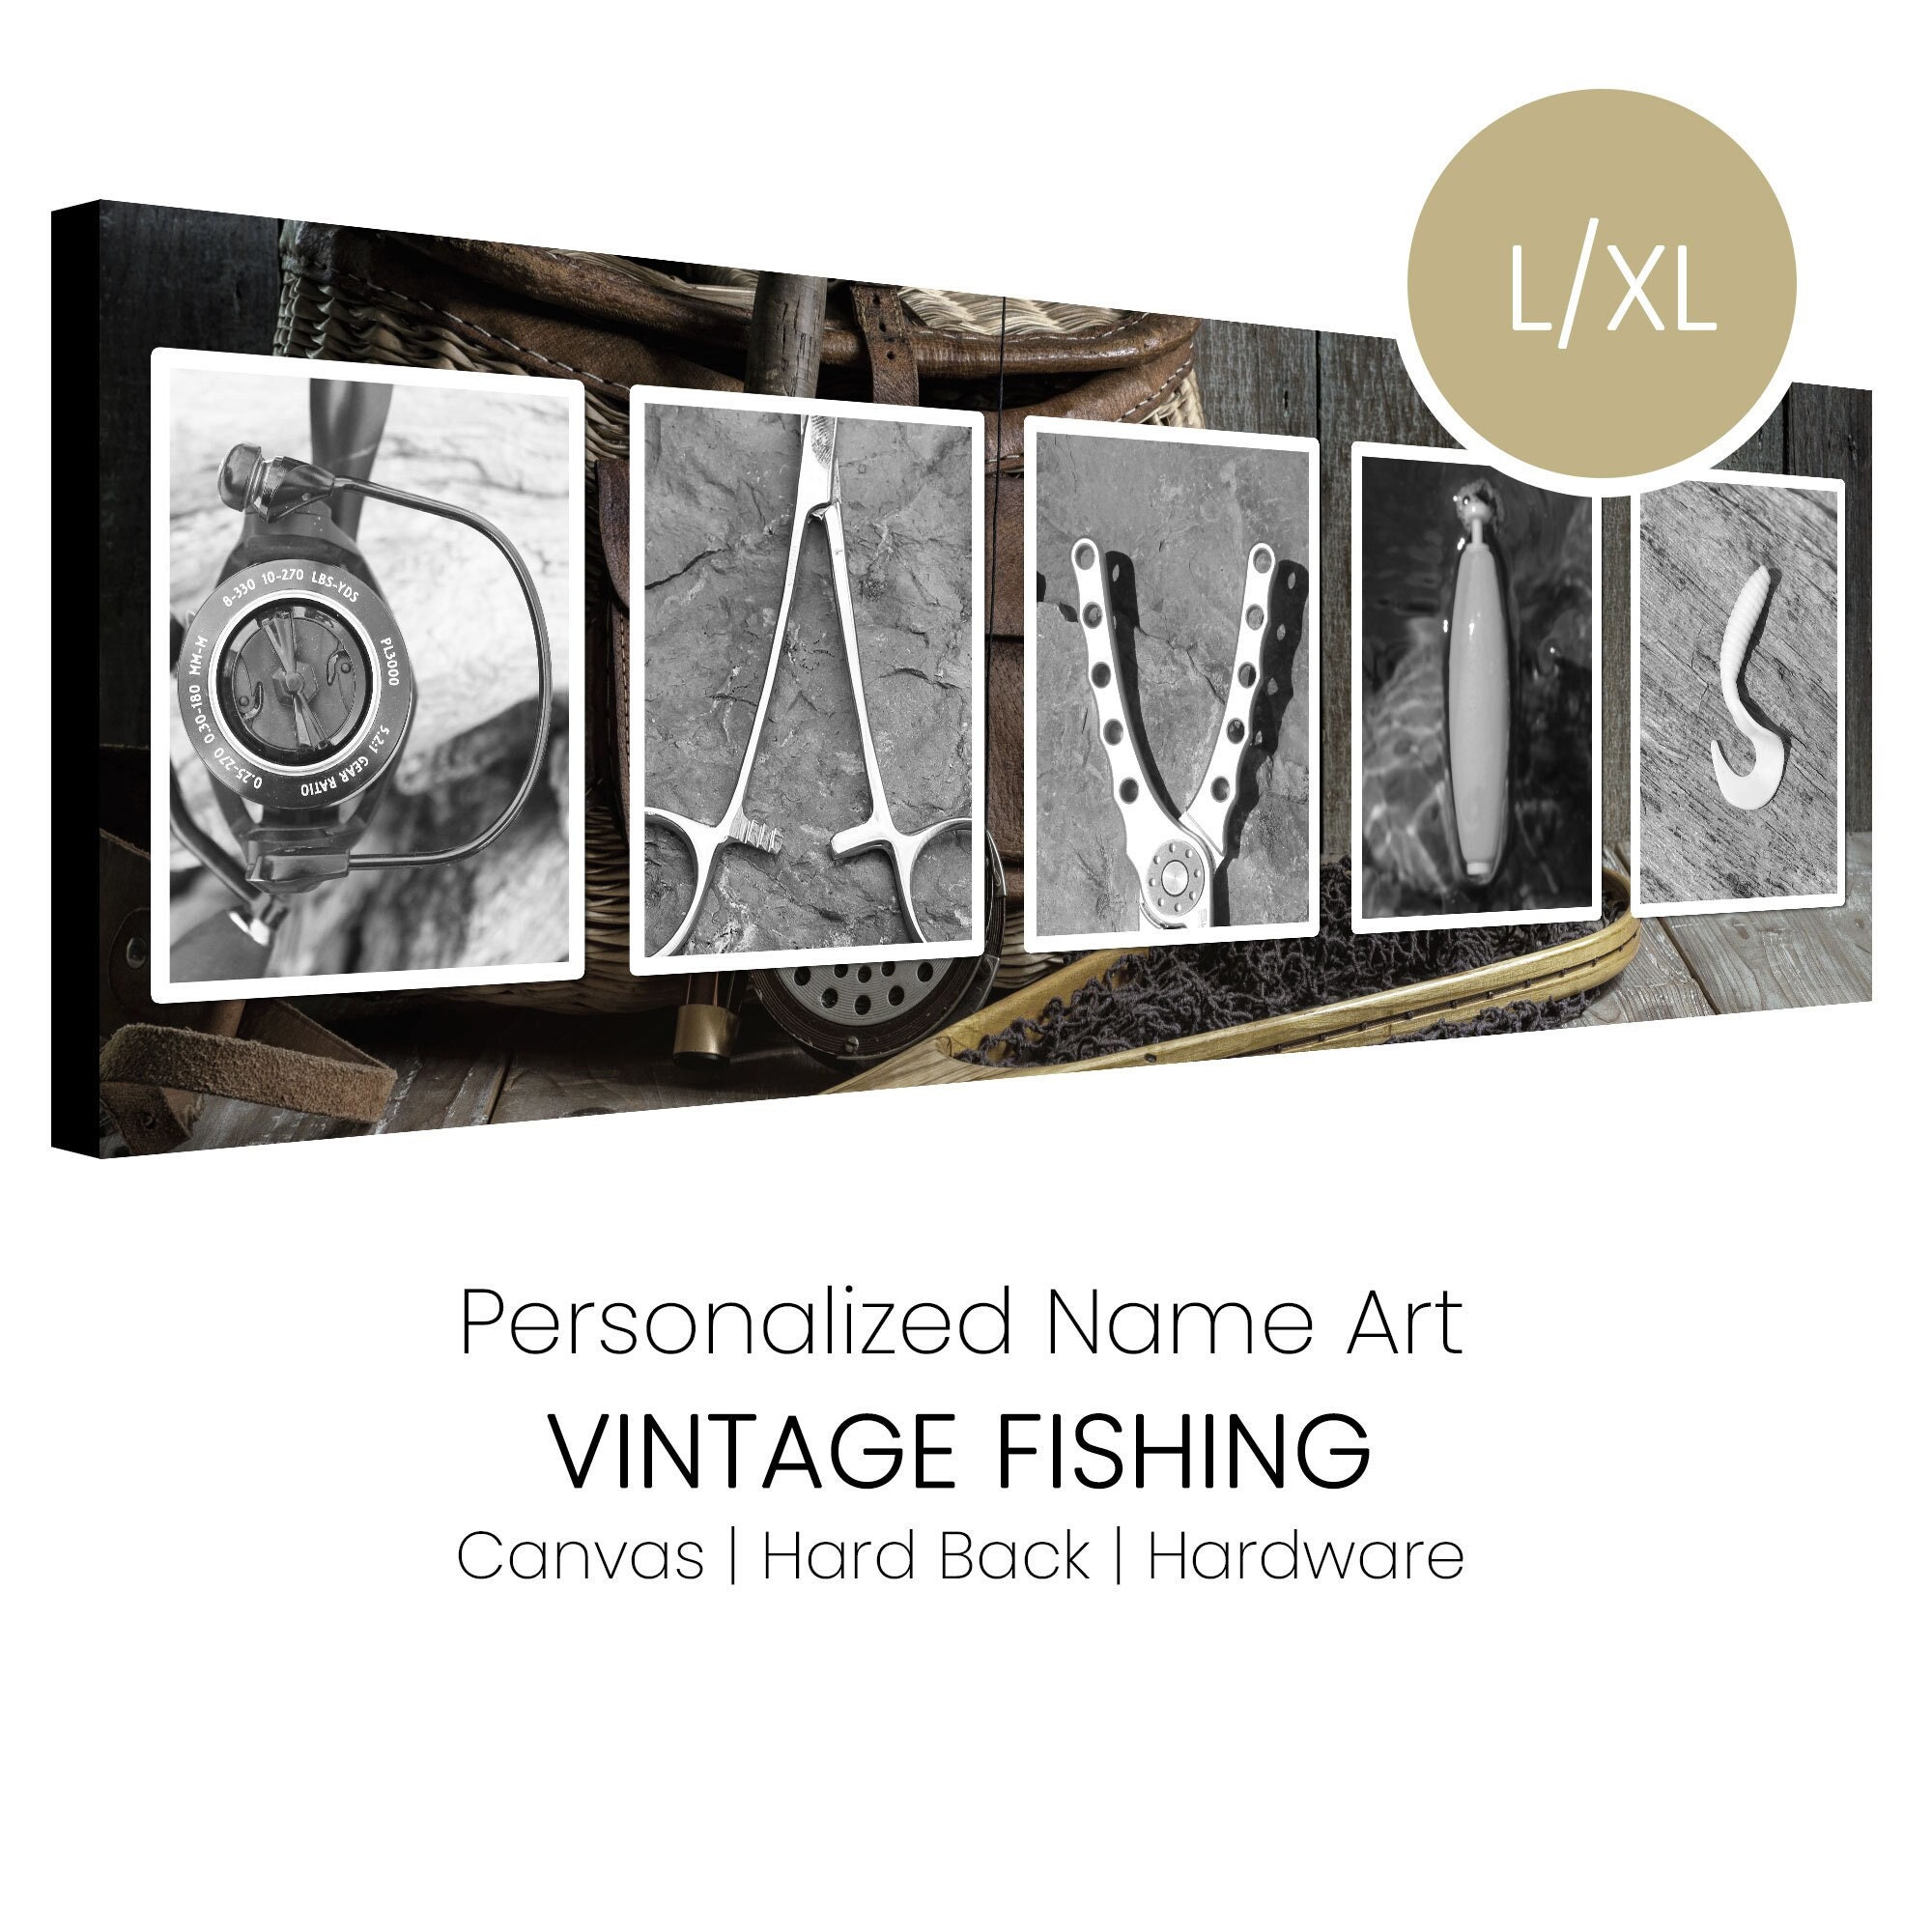 Personalized Fishing Name Art | Vintage Fishing Gift | Fishing Sign | Gifts  for Fisherman | Personalized Name Art | L/XL | Made in the USA